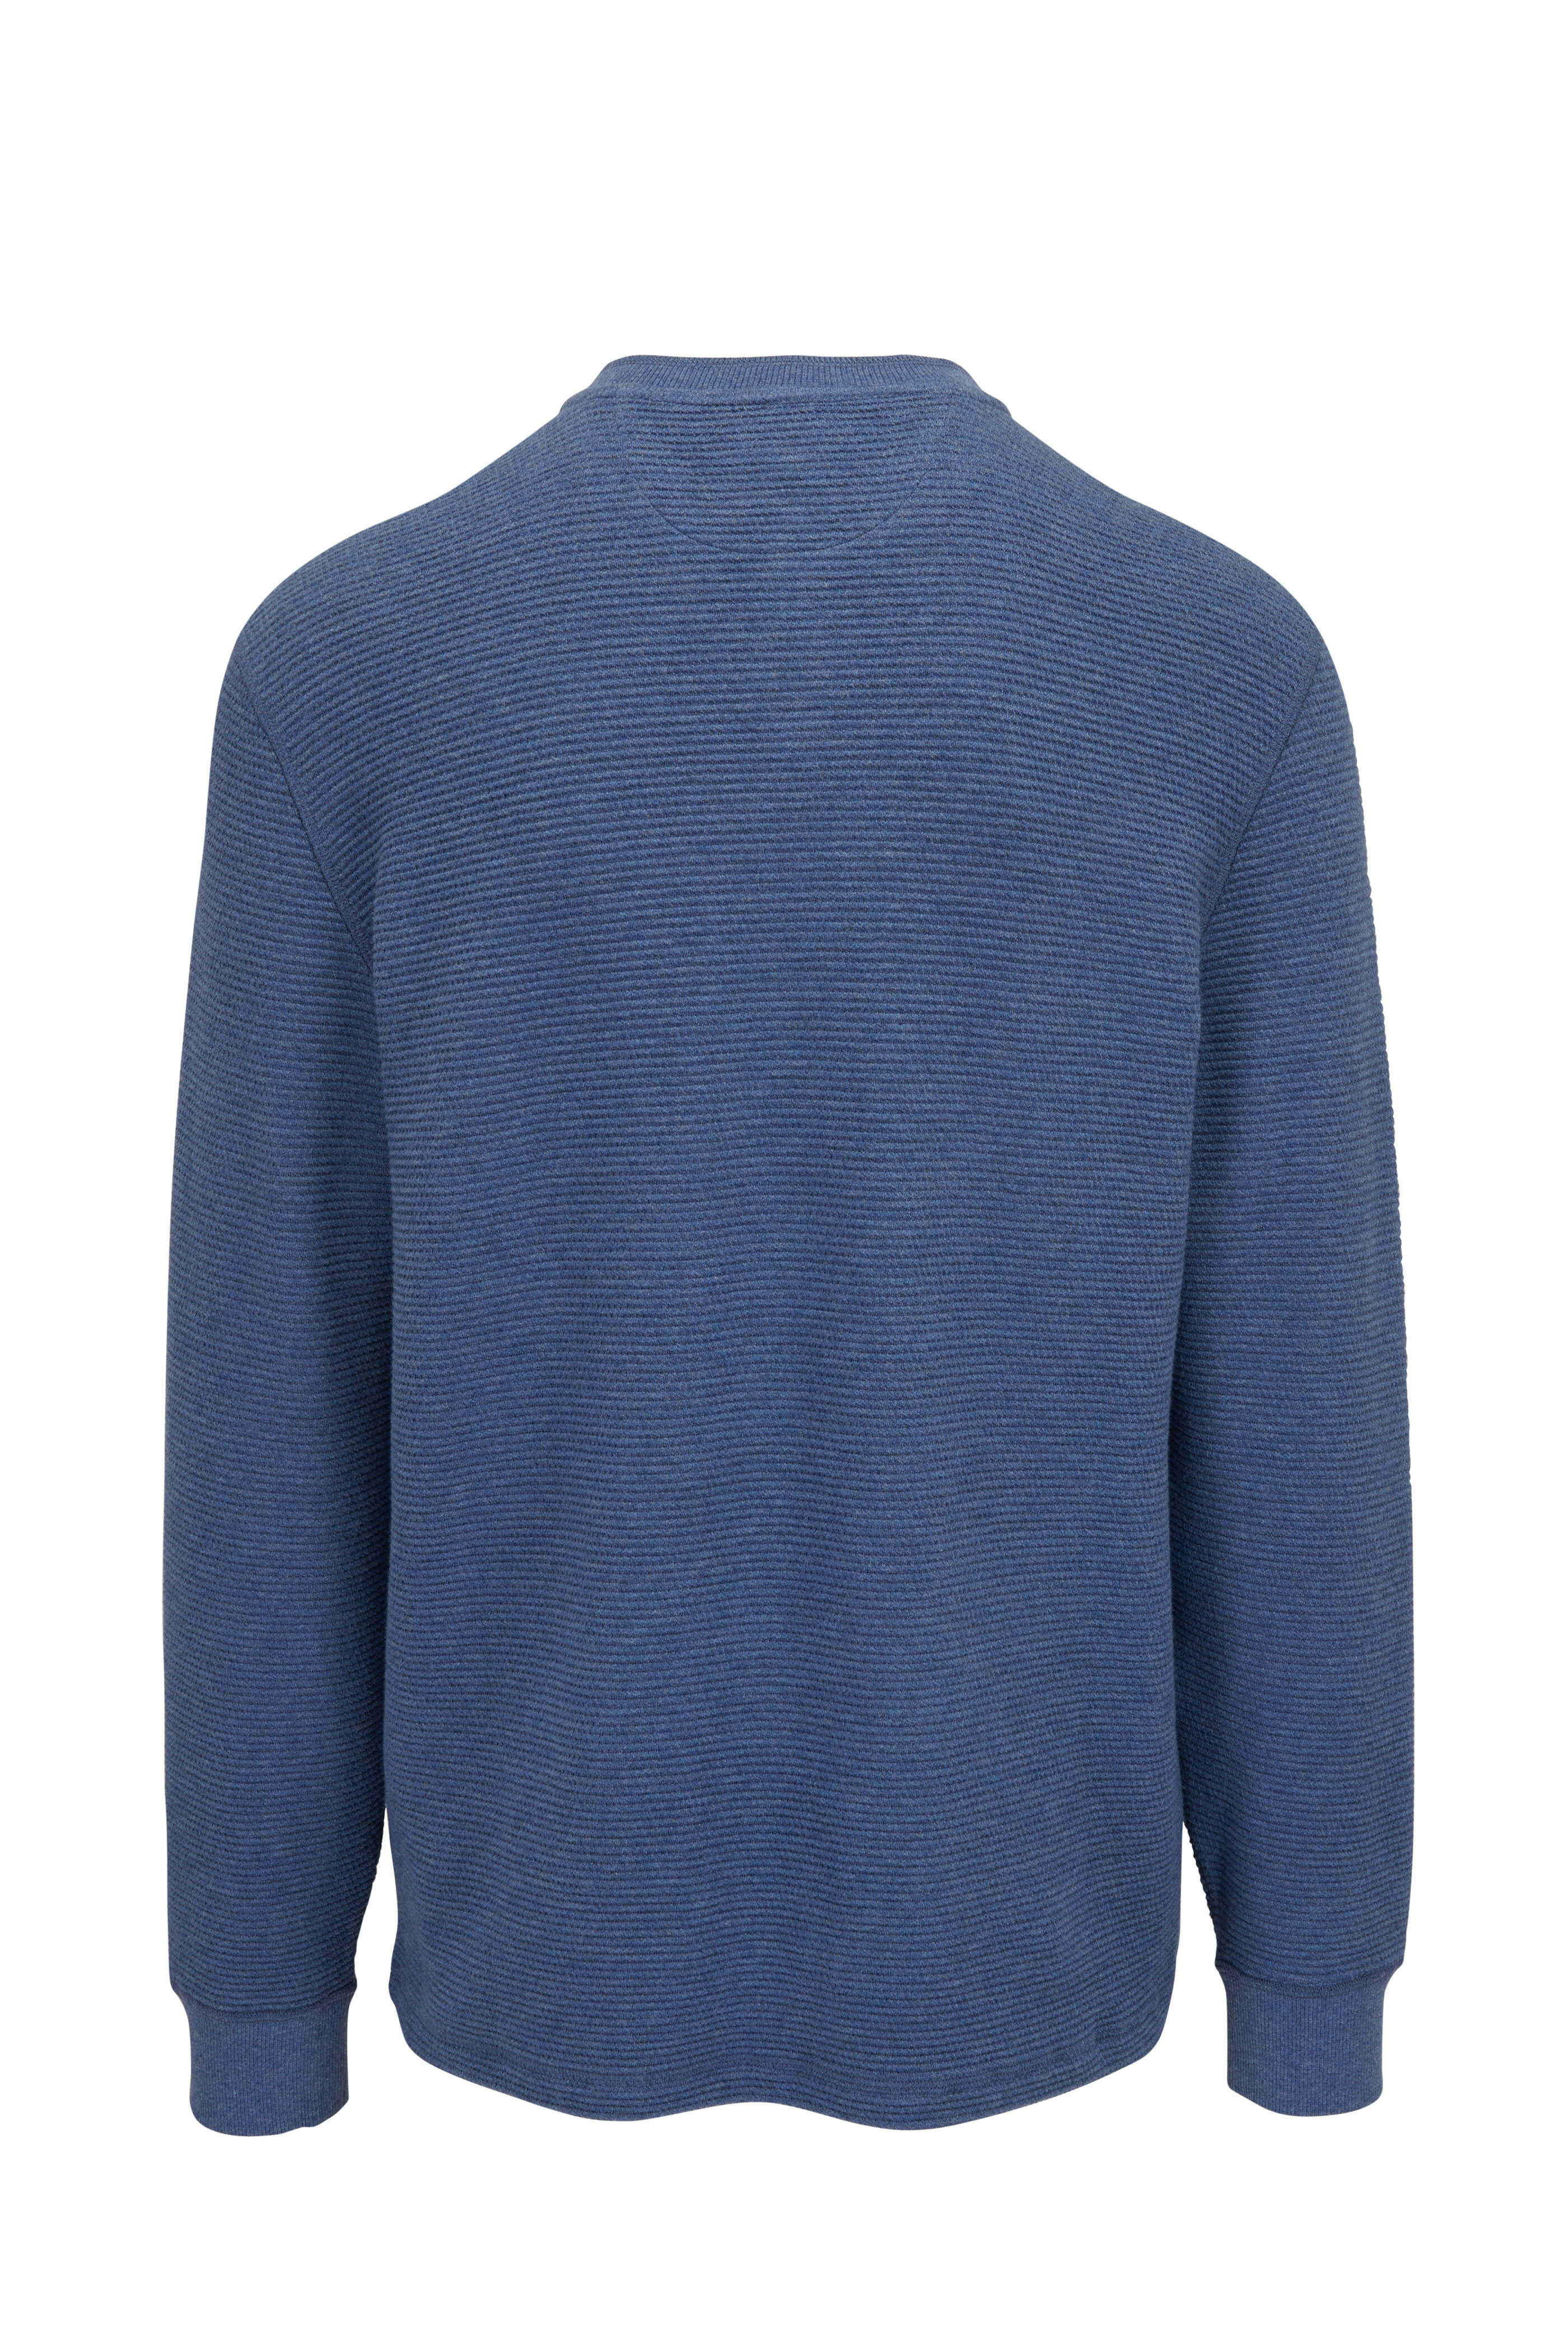 Faherty Brand - Surf Clearwater Heather Waffle Knit Henley